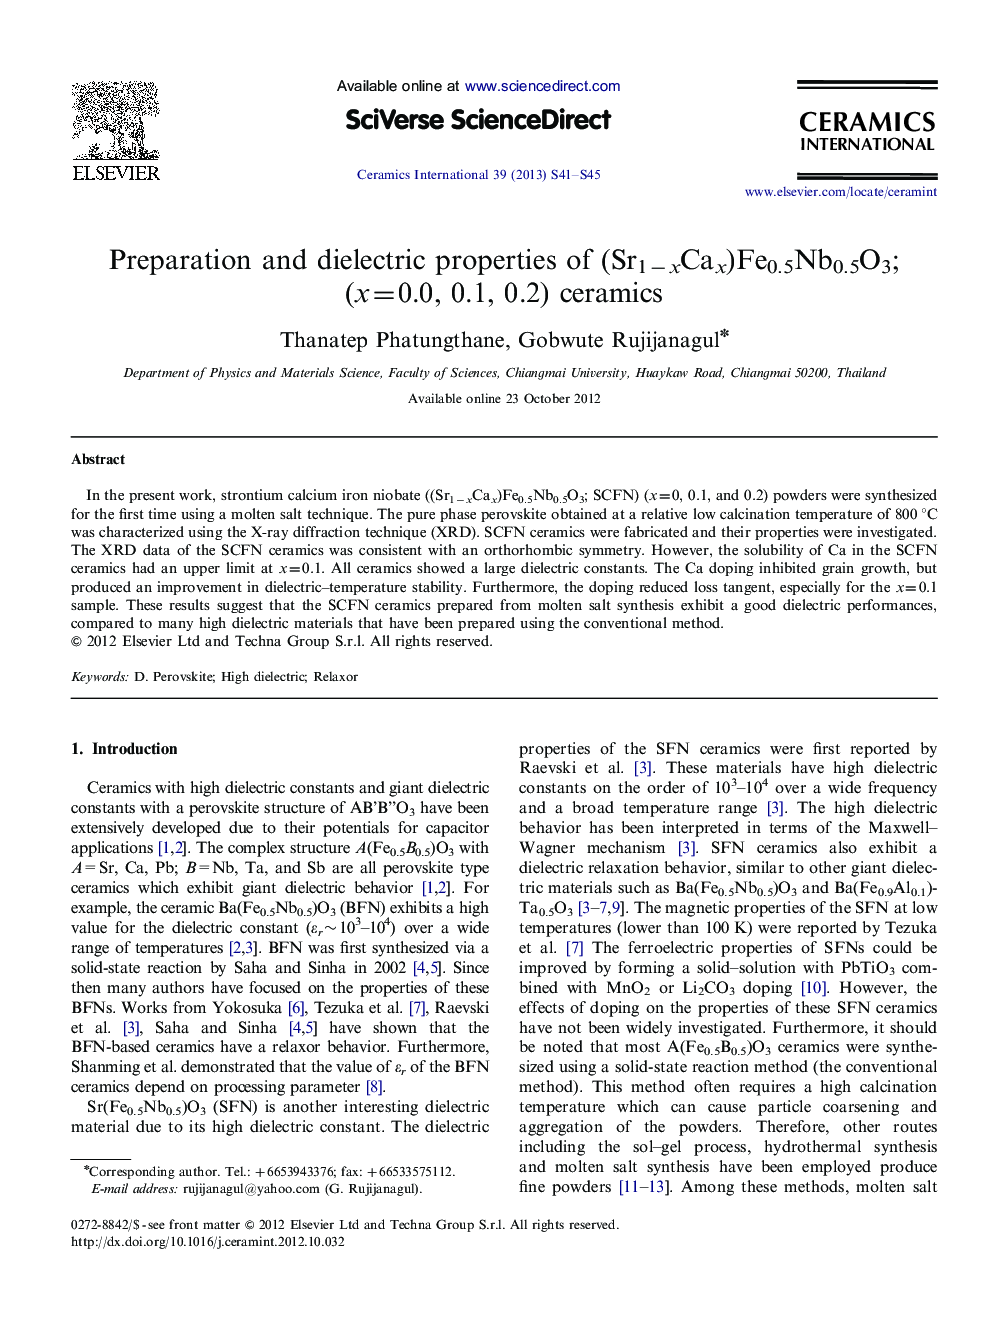 Preparation and dielectric properties of (Sr1−xCax)Fe0.5Nb0.5O3; (x=0.0, 0.1, 0.2) ceramics